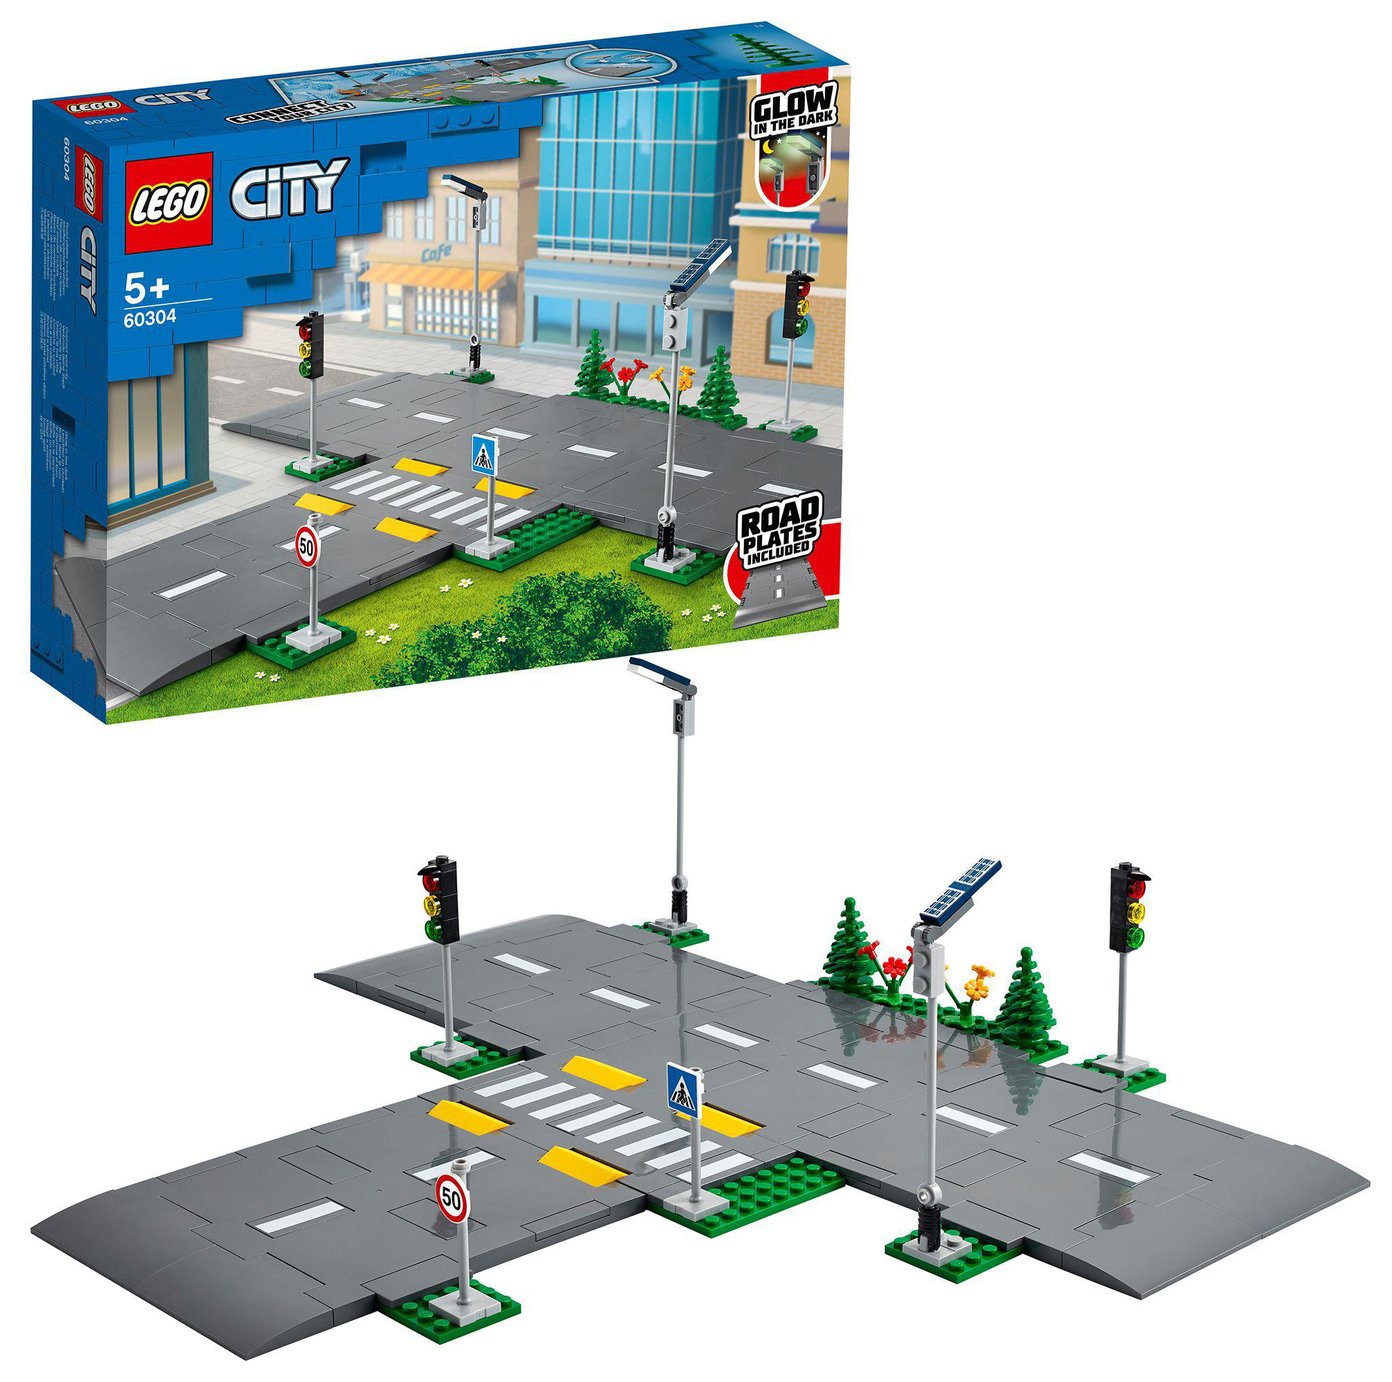 LEGO City Road Plates Building Set with Traffic Lights 60304